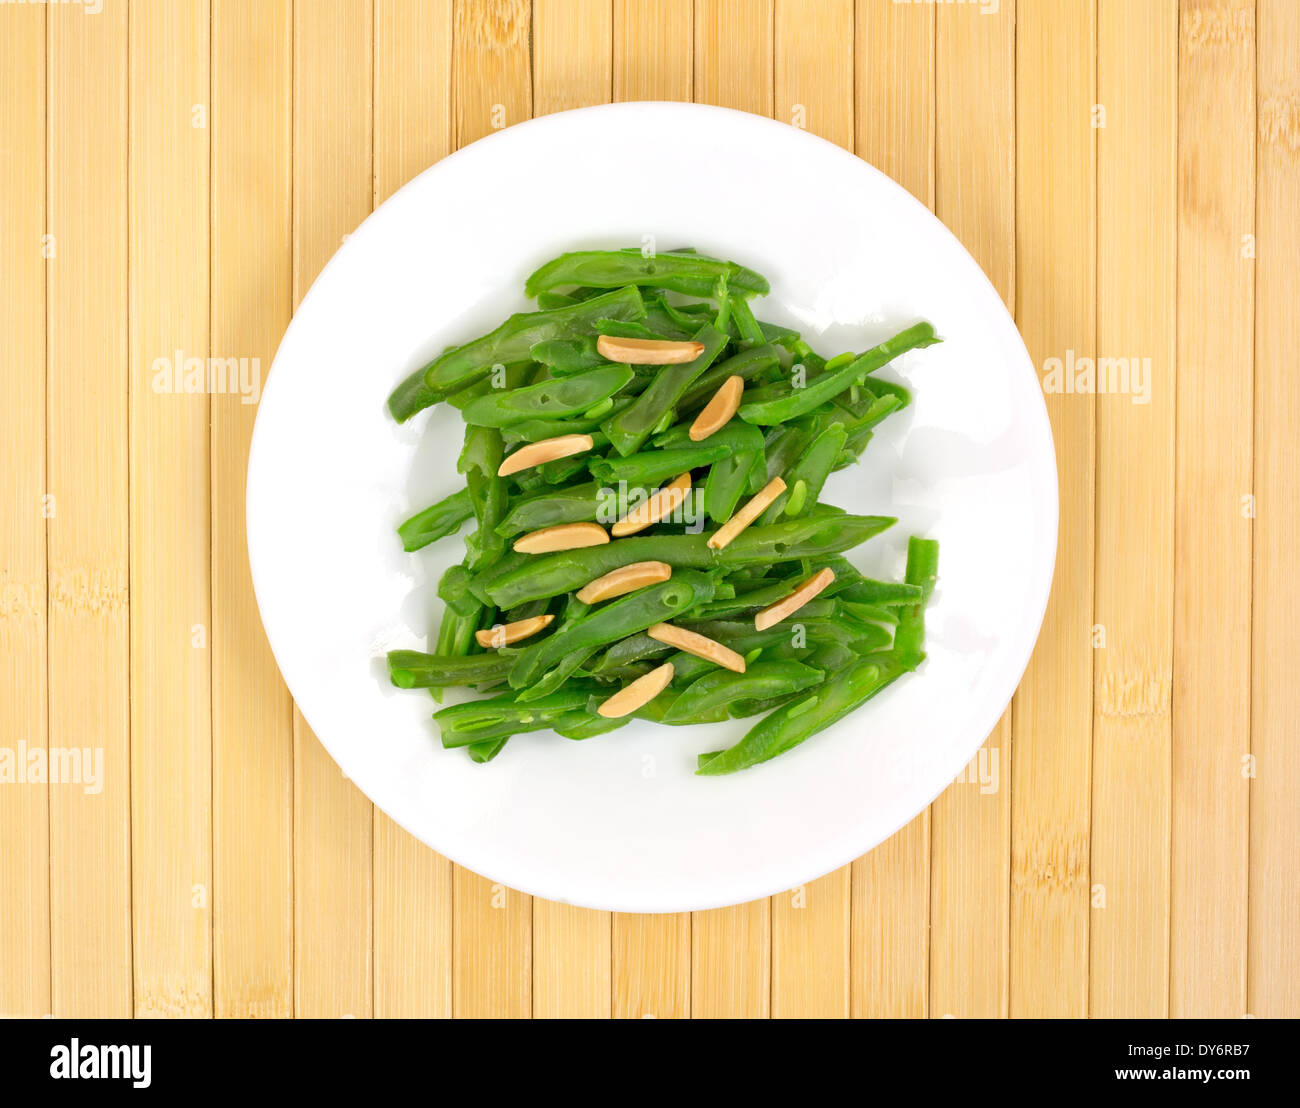 A small serving of green beans with sliced almonds on a white plate atop a wood place mat. Stock Photo